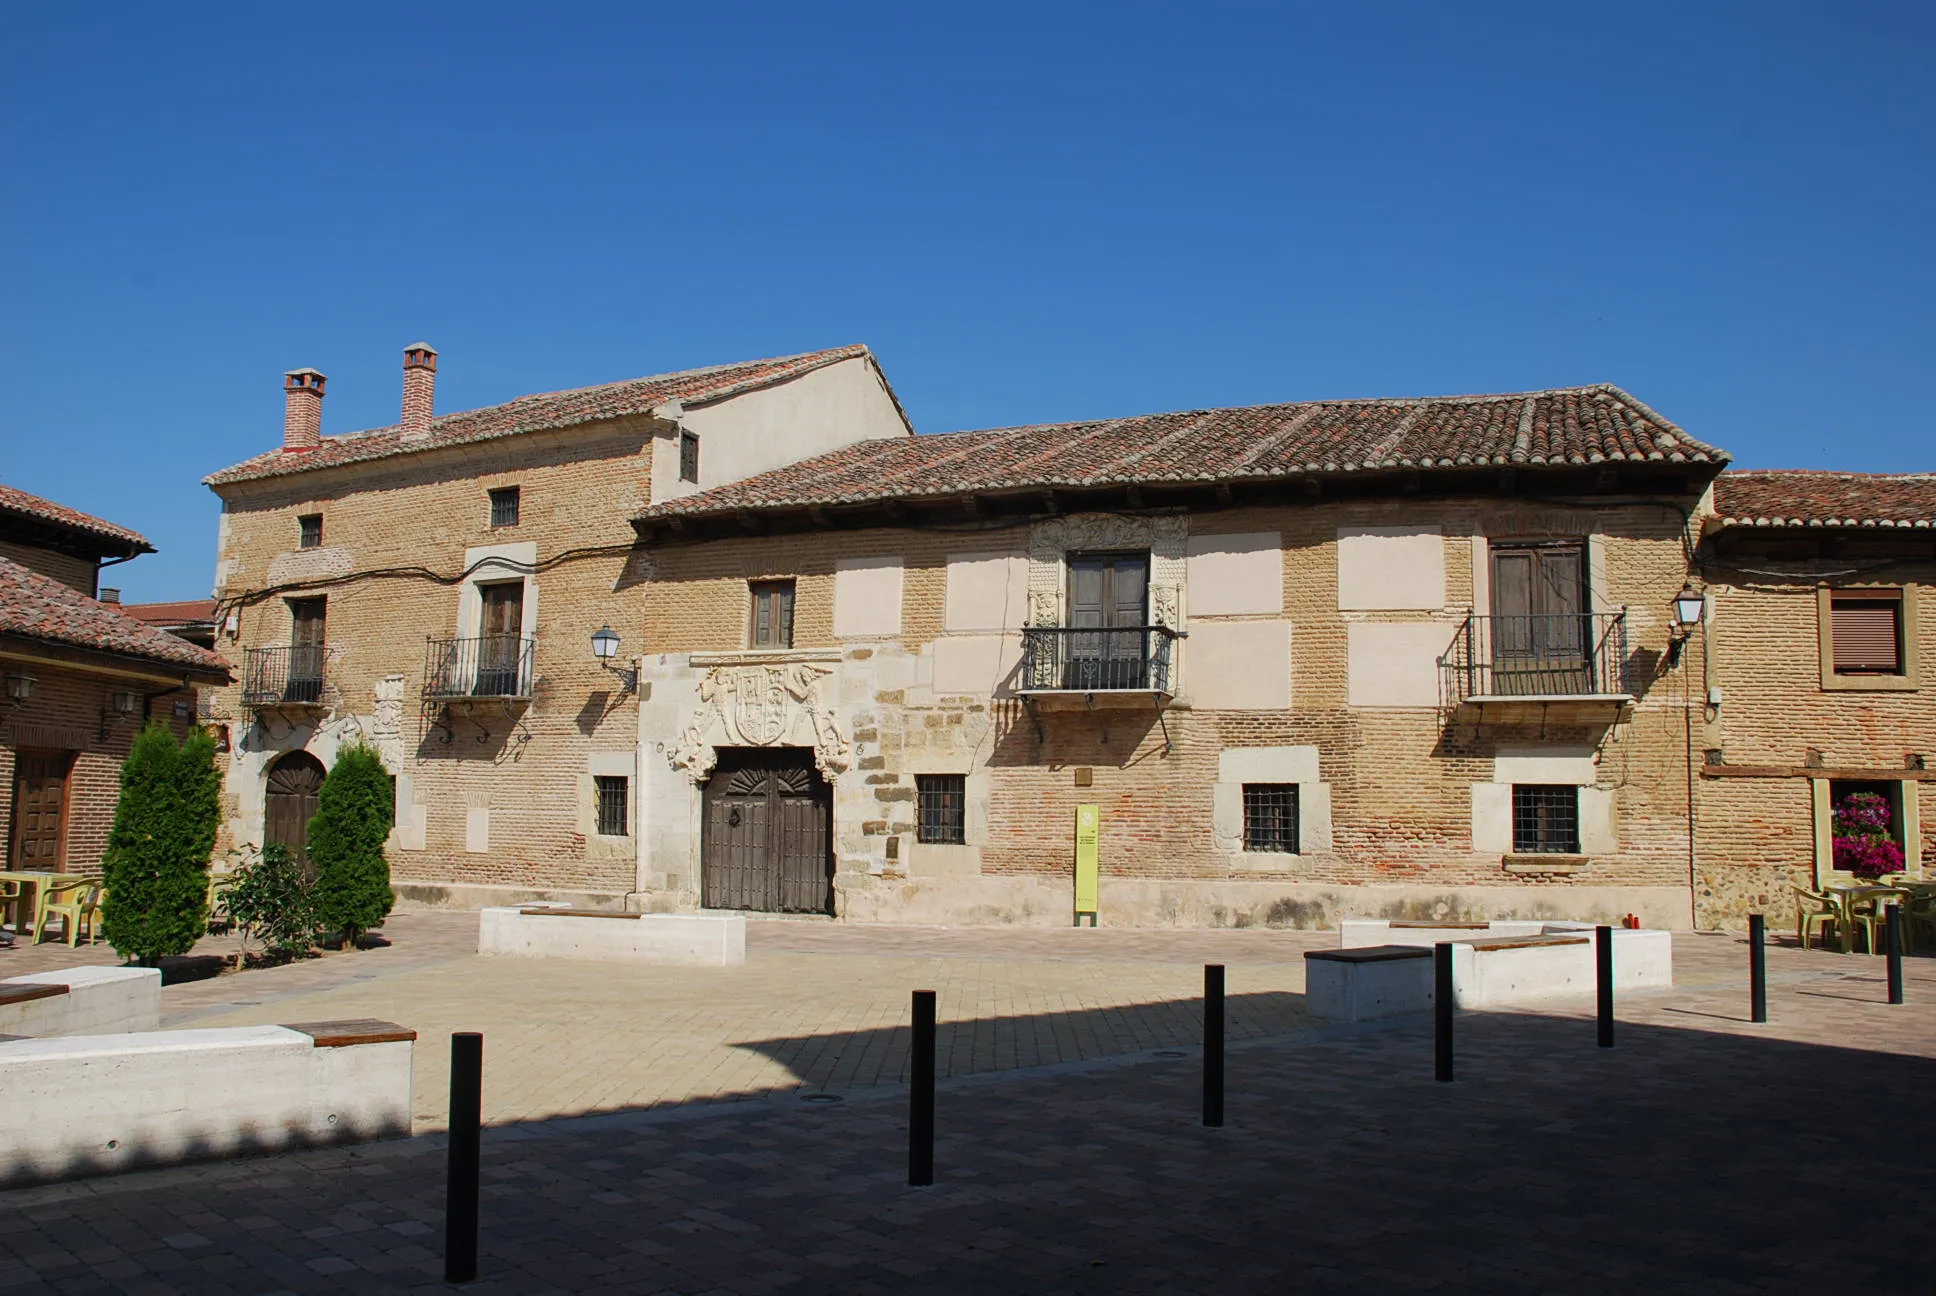 Photo showing: View of the Manor house of the Marquis de La Valdavia. Located in the plaza of the Marquis de la Valdavia in Saldaña (Palencia, Castile and León). It is one of the most interesting buildings in Saldaña, finding integrated by the union of two large stately homes in its day, two and three heights which today form a single House, owned by the current located the Marquis, Mr. Mariano Osorio Lamadrid. This is a set with continuous renovations to a common source around the 15th century - 16th, and strongly remodeled in the 17TH and 18th centuries. Example of the bold and plastic Spanish Renaissance architecture. Highlight their noble cover, shields as a bear claw hung on one of the beams of the roof, which legend says was hunted by an ancestor of the current Marquis.